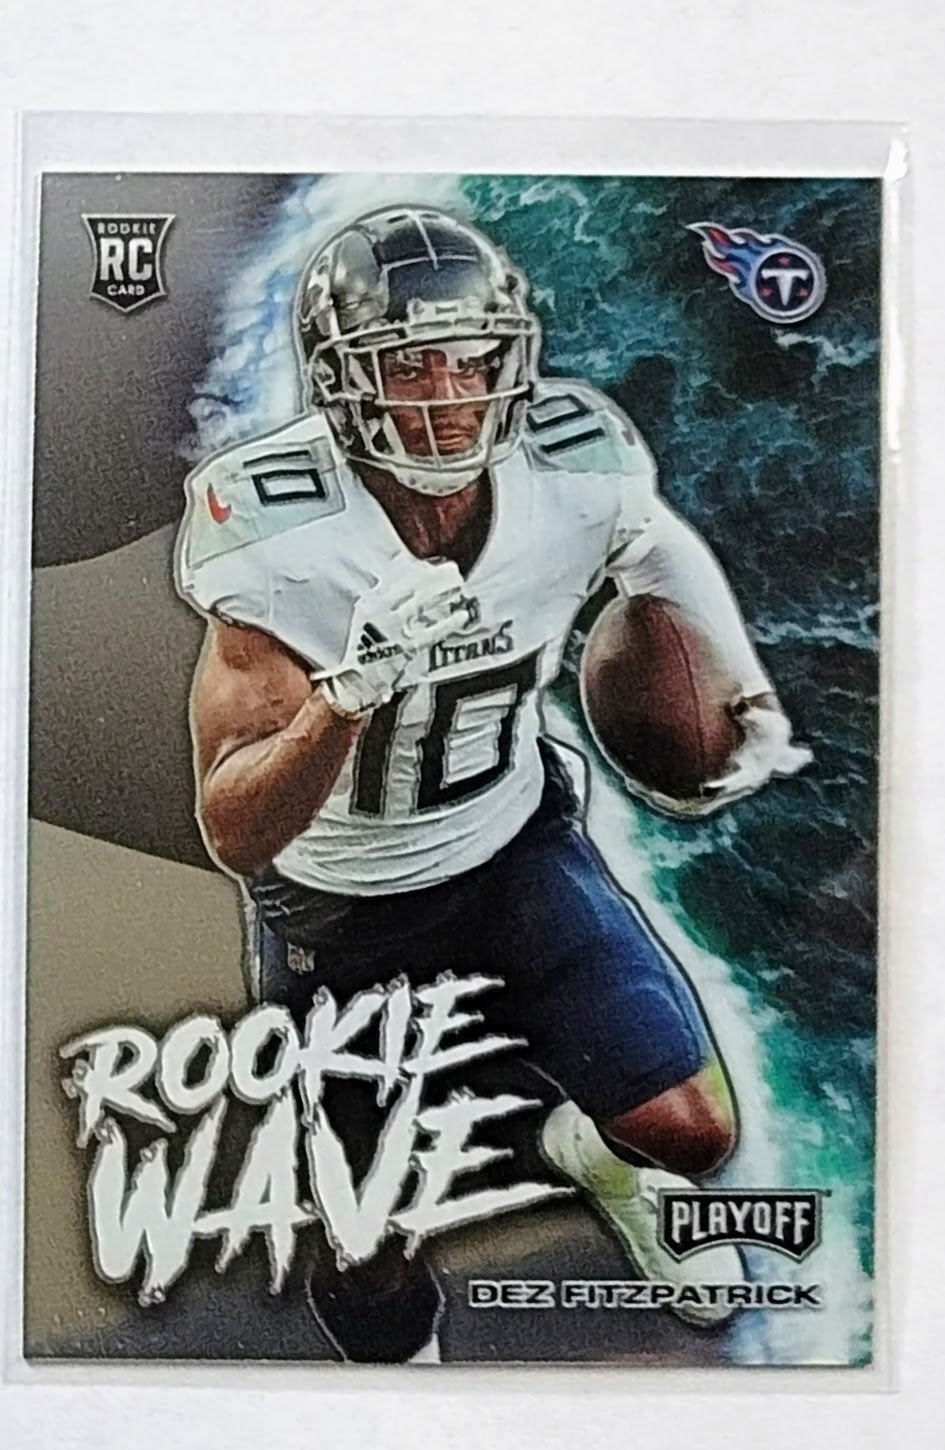 2021 Panini Playoff Dez Fitzpatrick Rookie Wave Insert Football Card AVM1 simple Xclusive Collectibles   